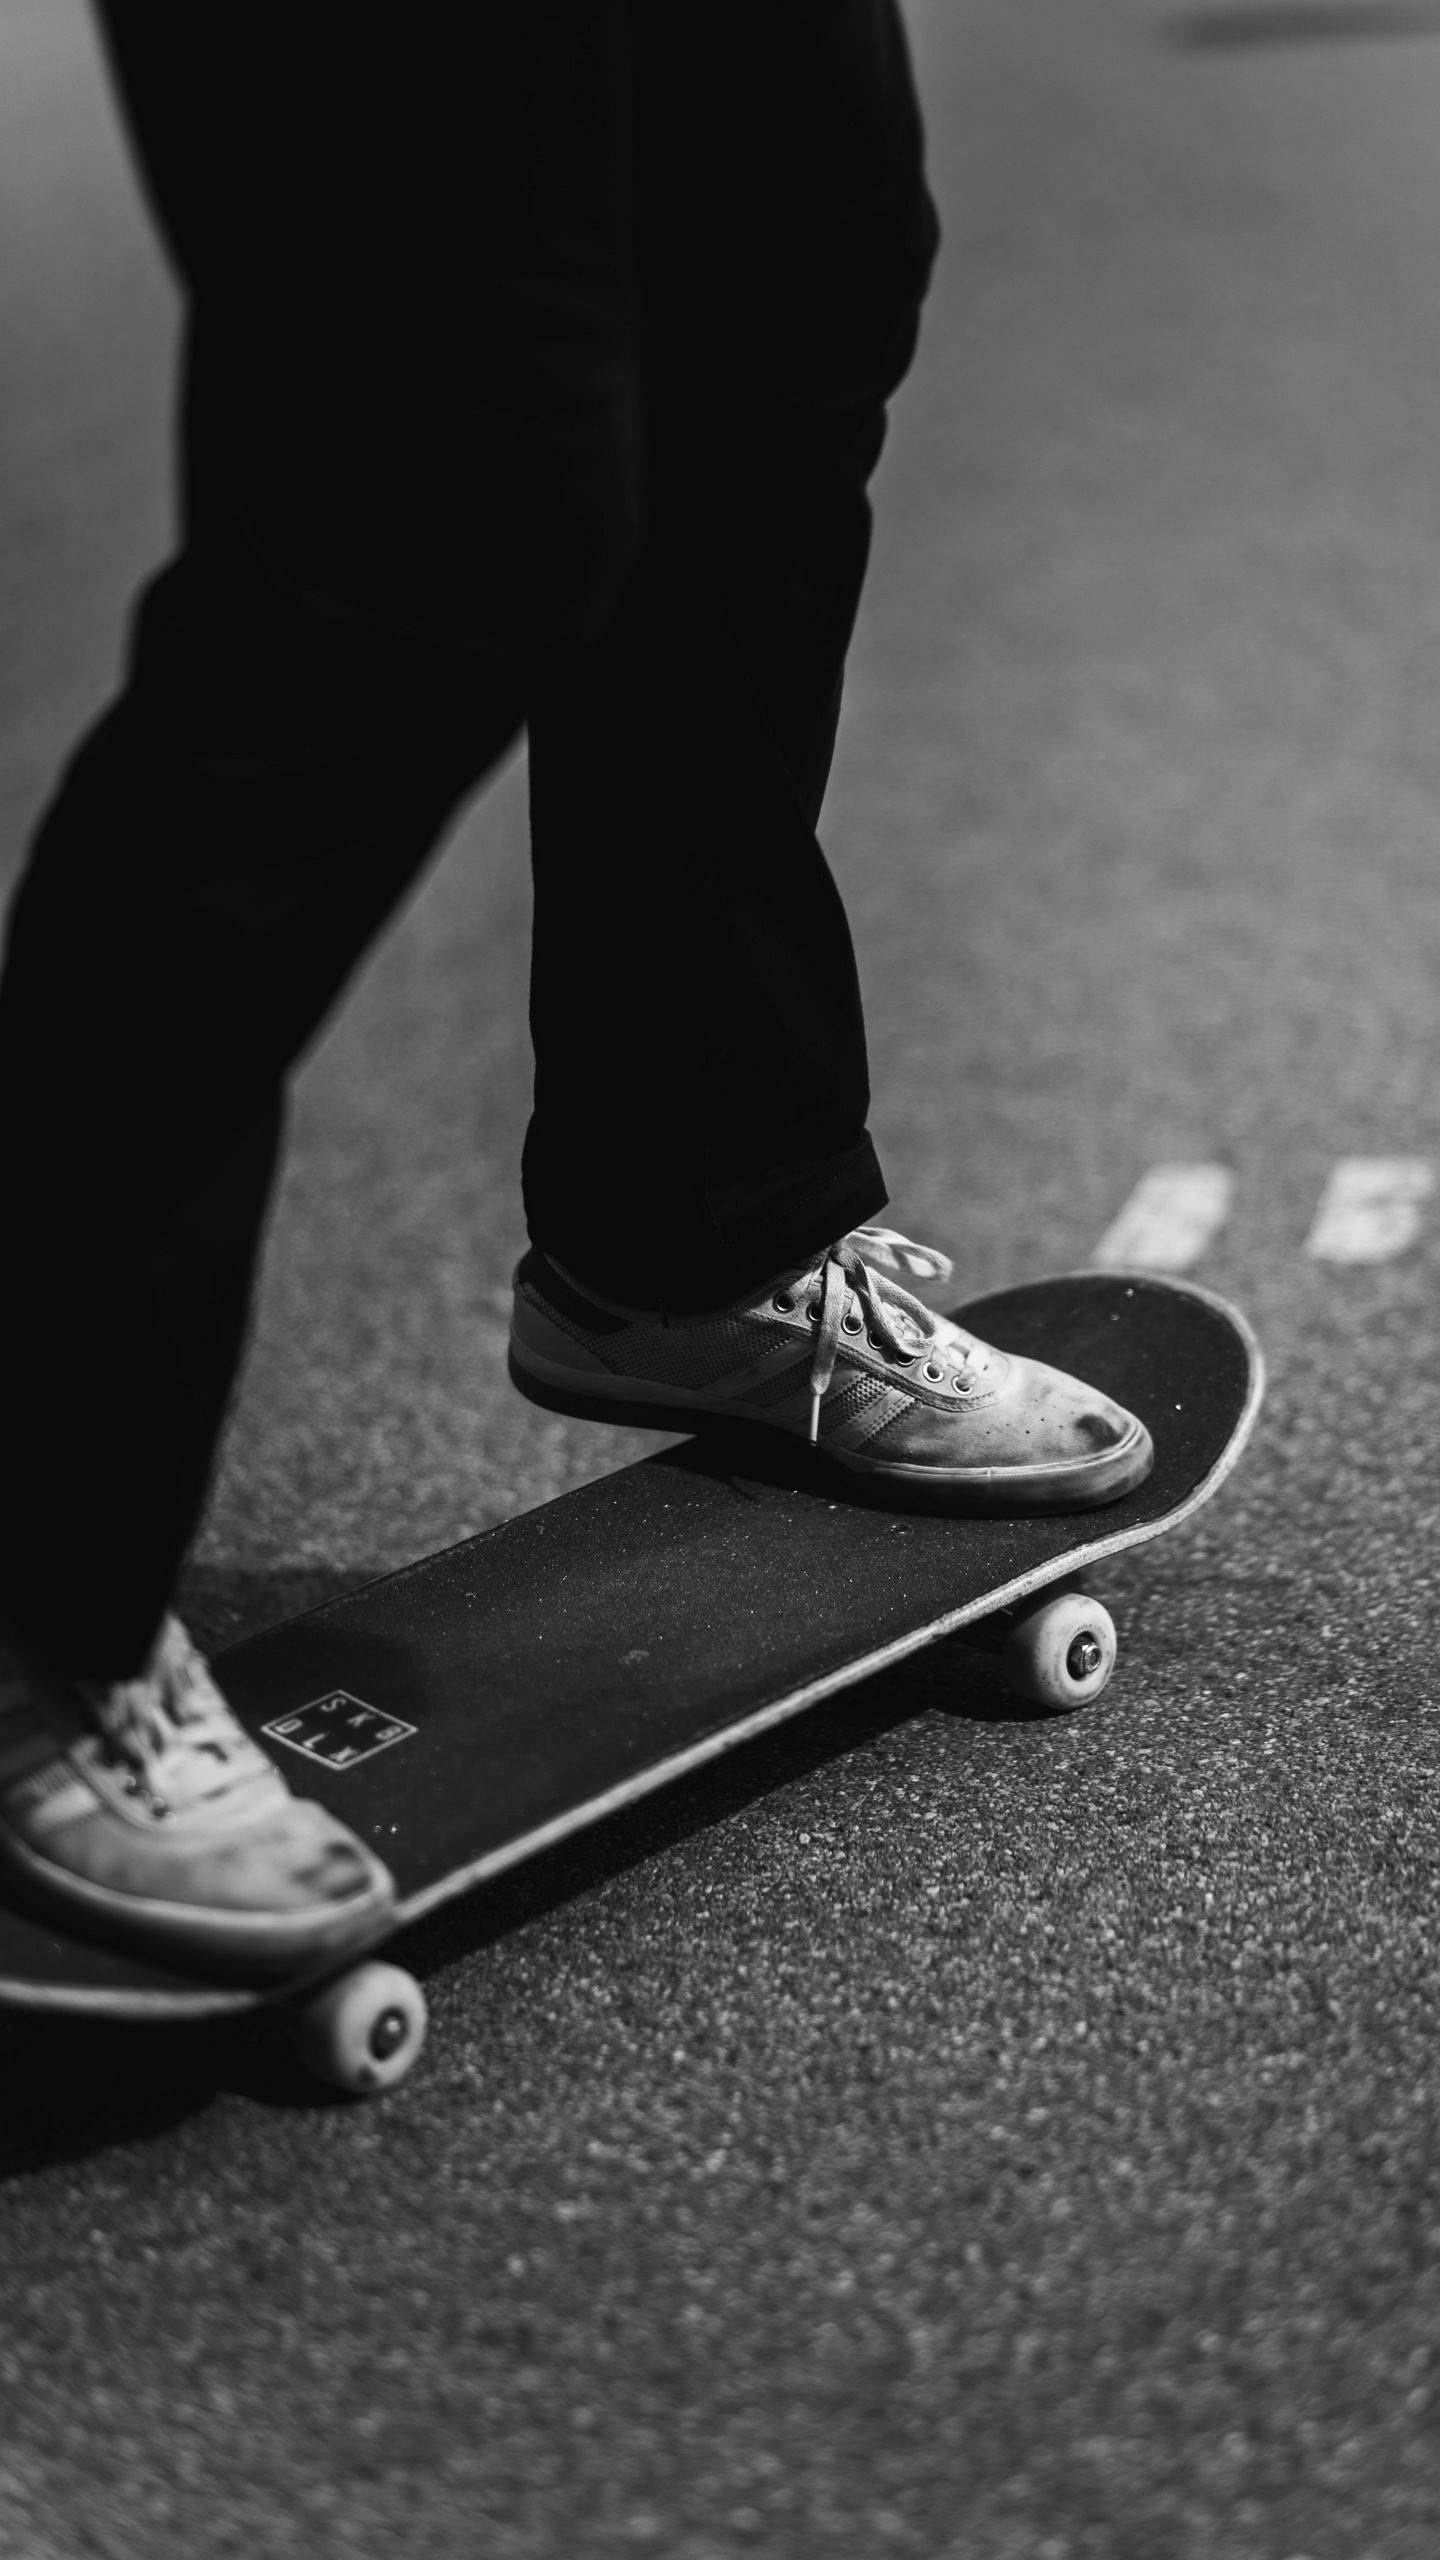 Download wallpaper 1440x2560 skate, sneakers, legs, bw qhd samsung galaxy s s edge, note, lg g4 HD background